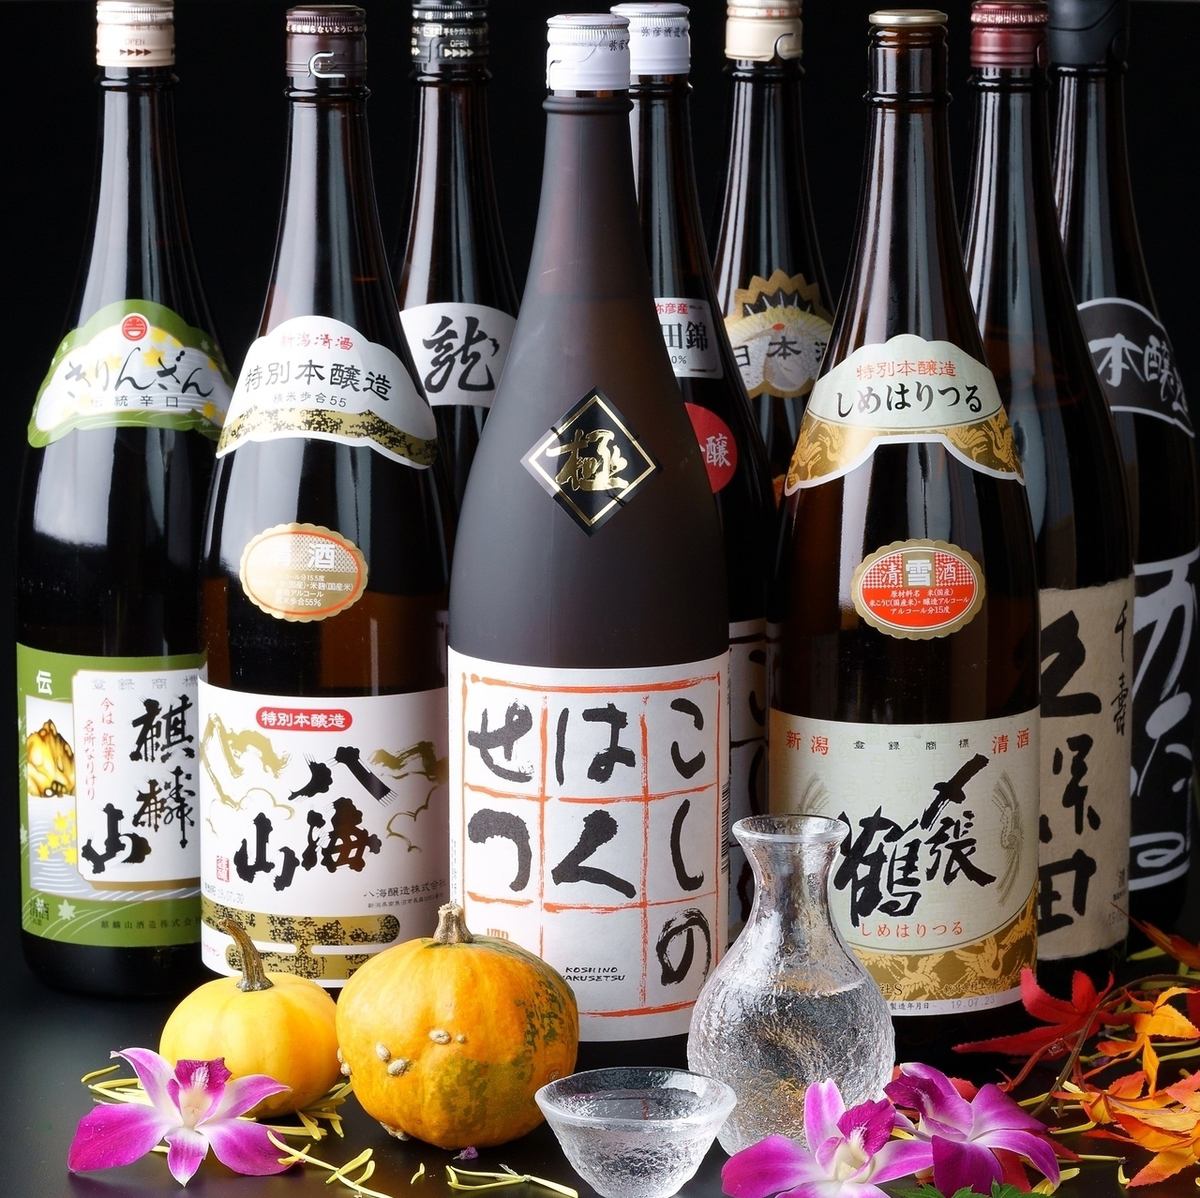 All-you-can-drink including 5 kinds of Niigata local sake from 1,800 yen to 1,300 yen♪Private room available!